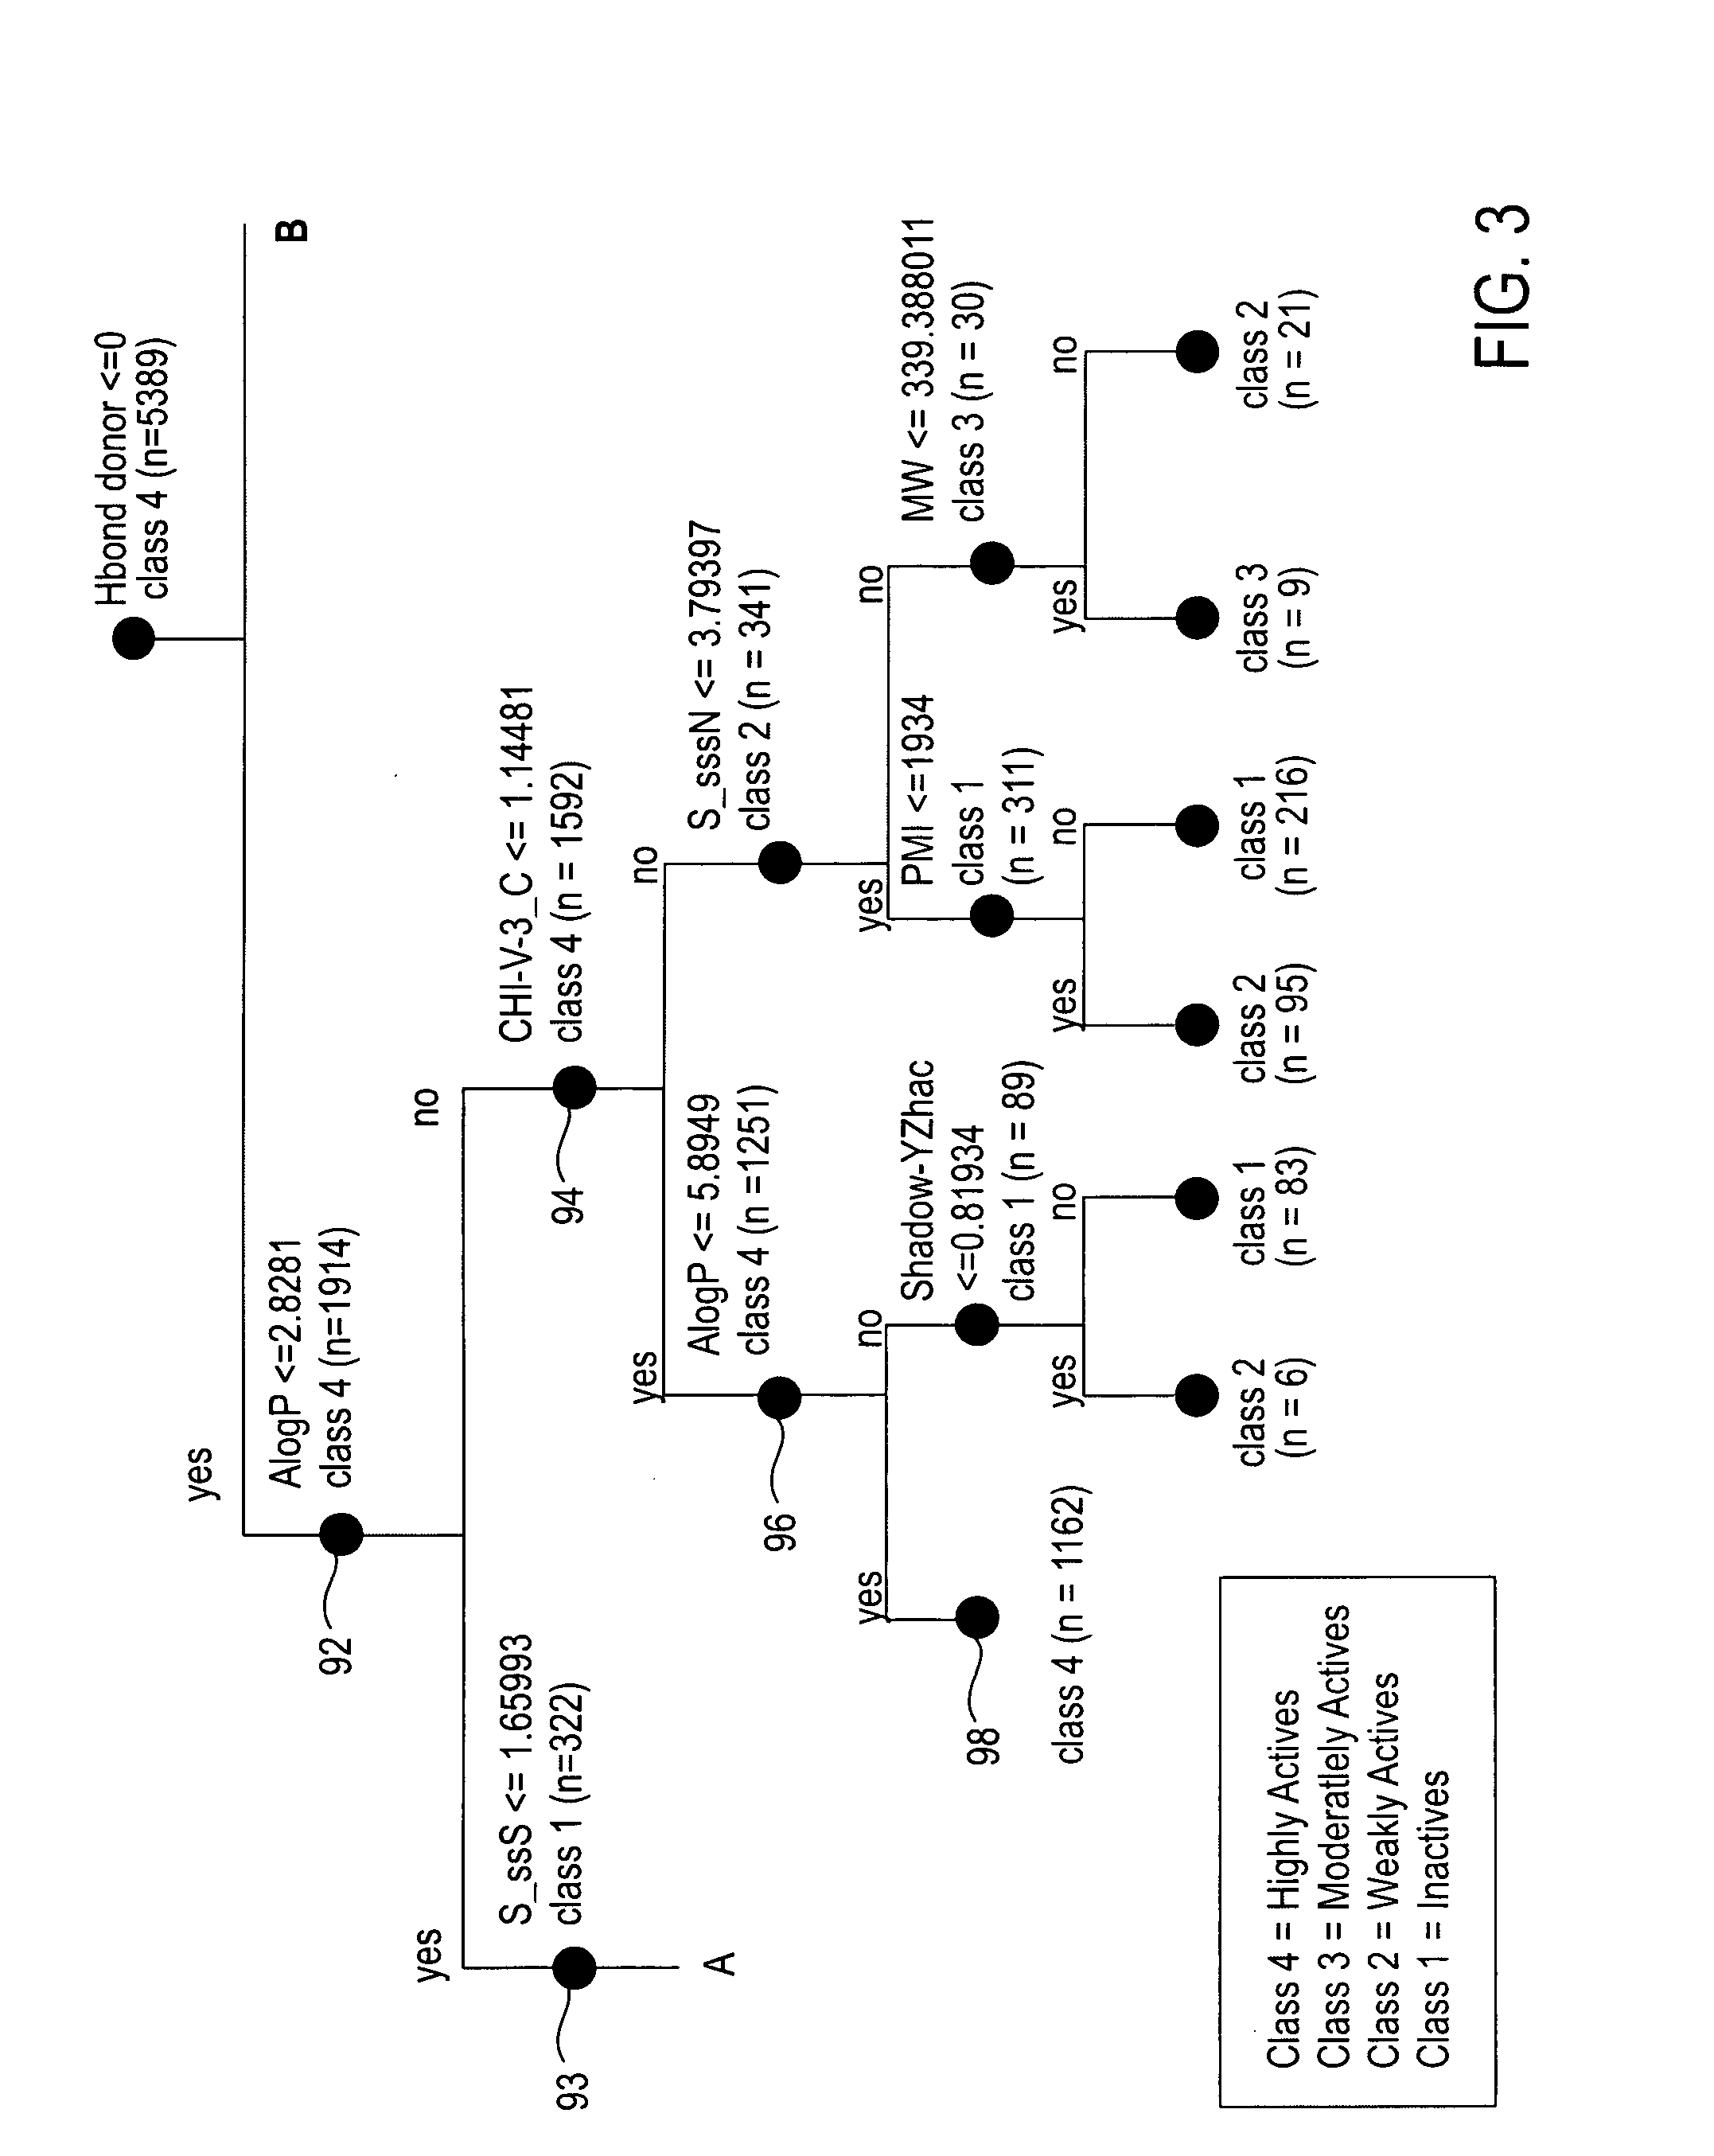 Method for screening compounds using consensus selection and multiple descriptor sets